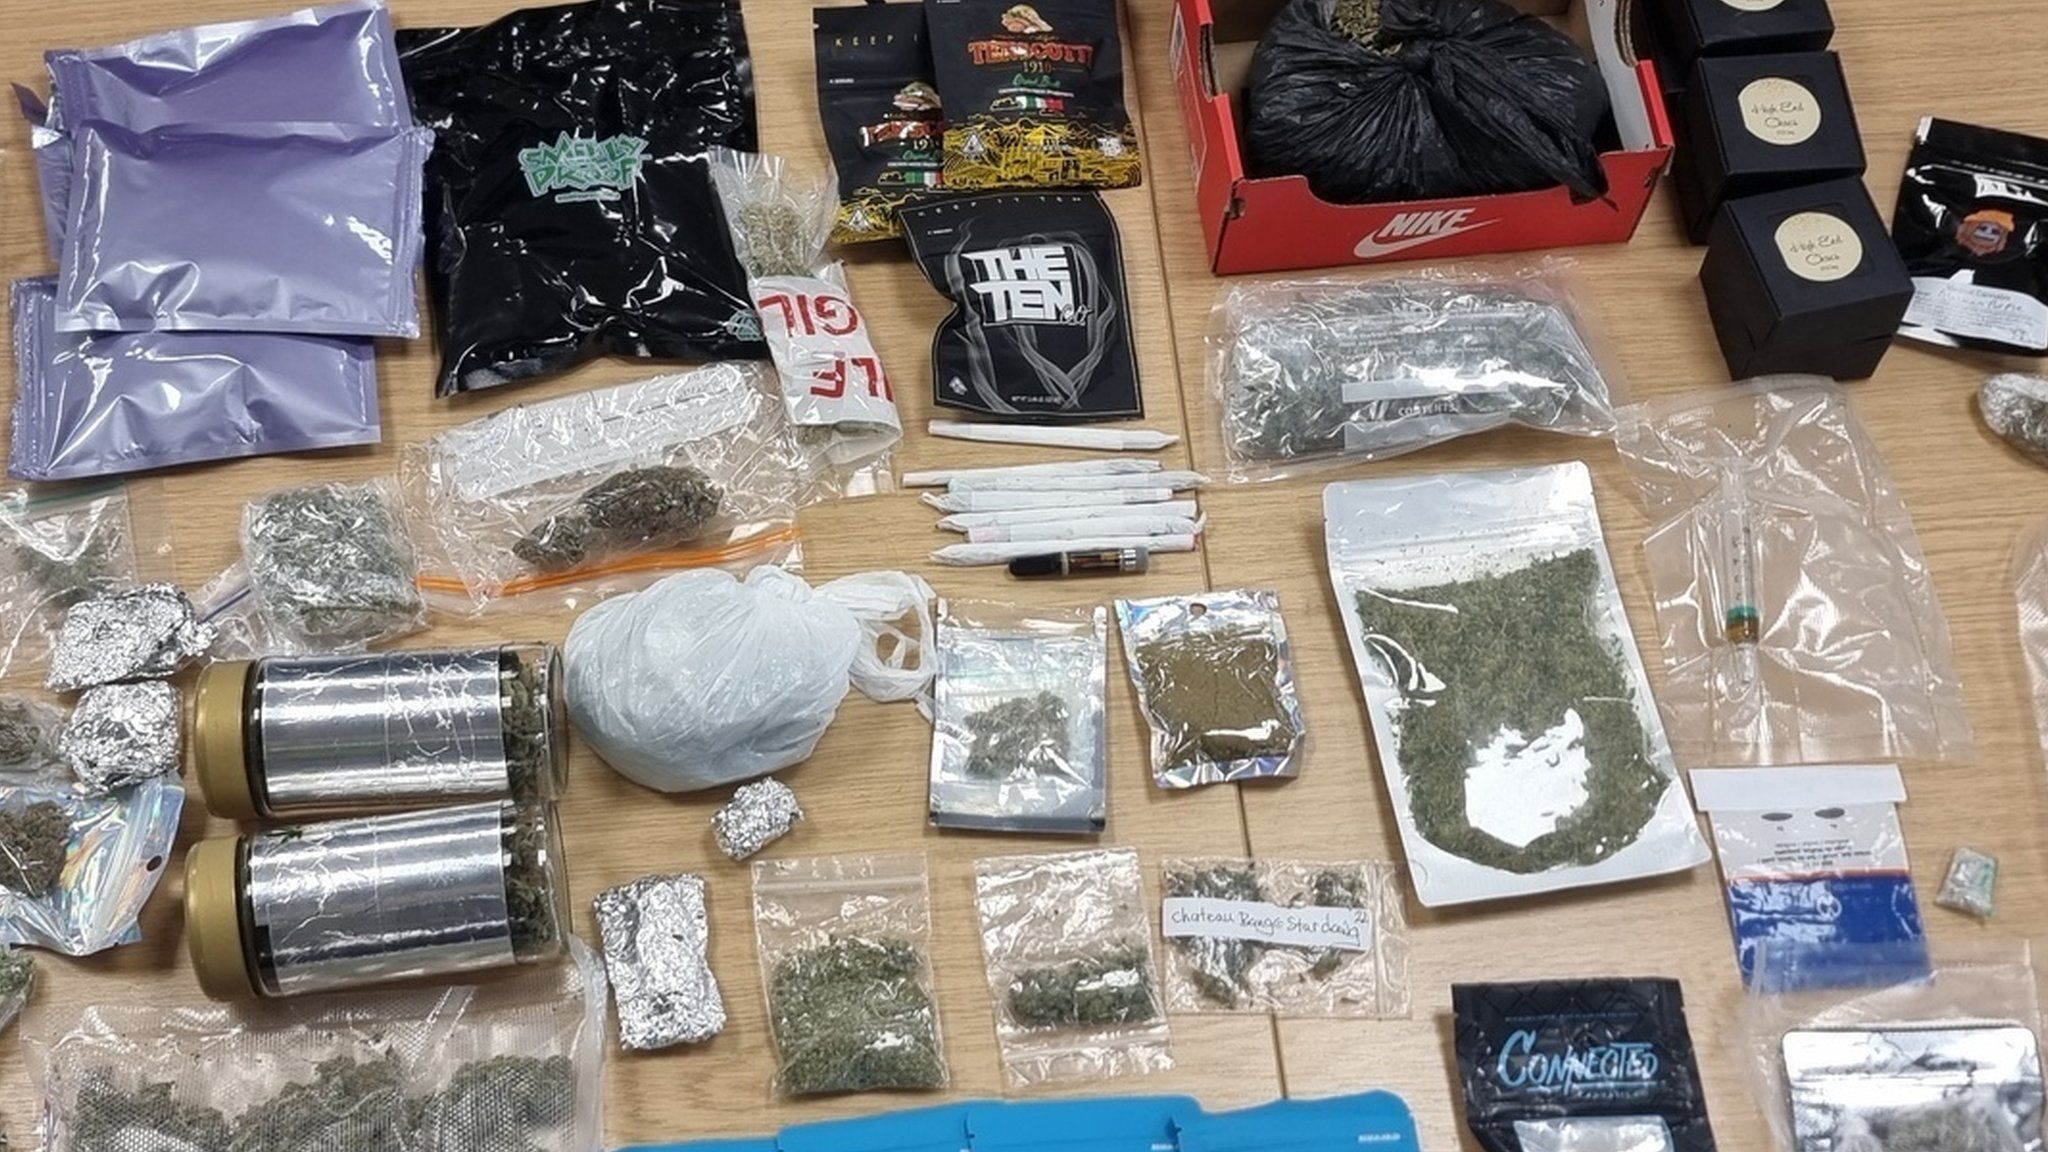 Drugs intercepted at the Werrington sorting office in Peterborough